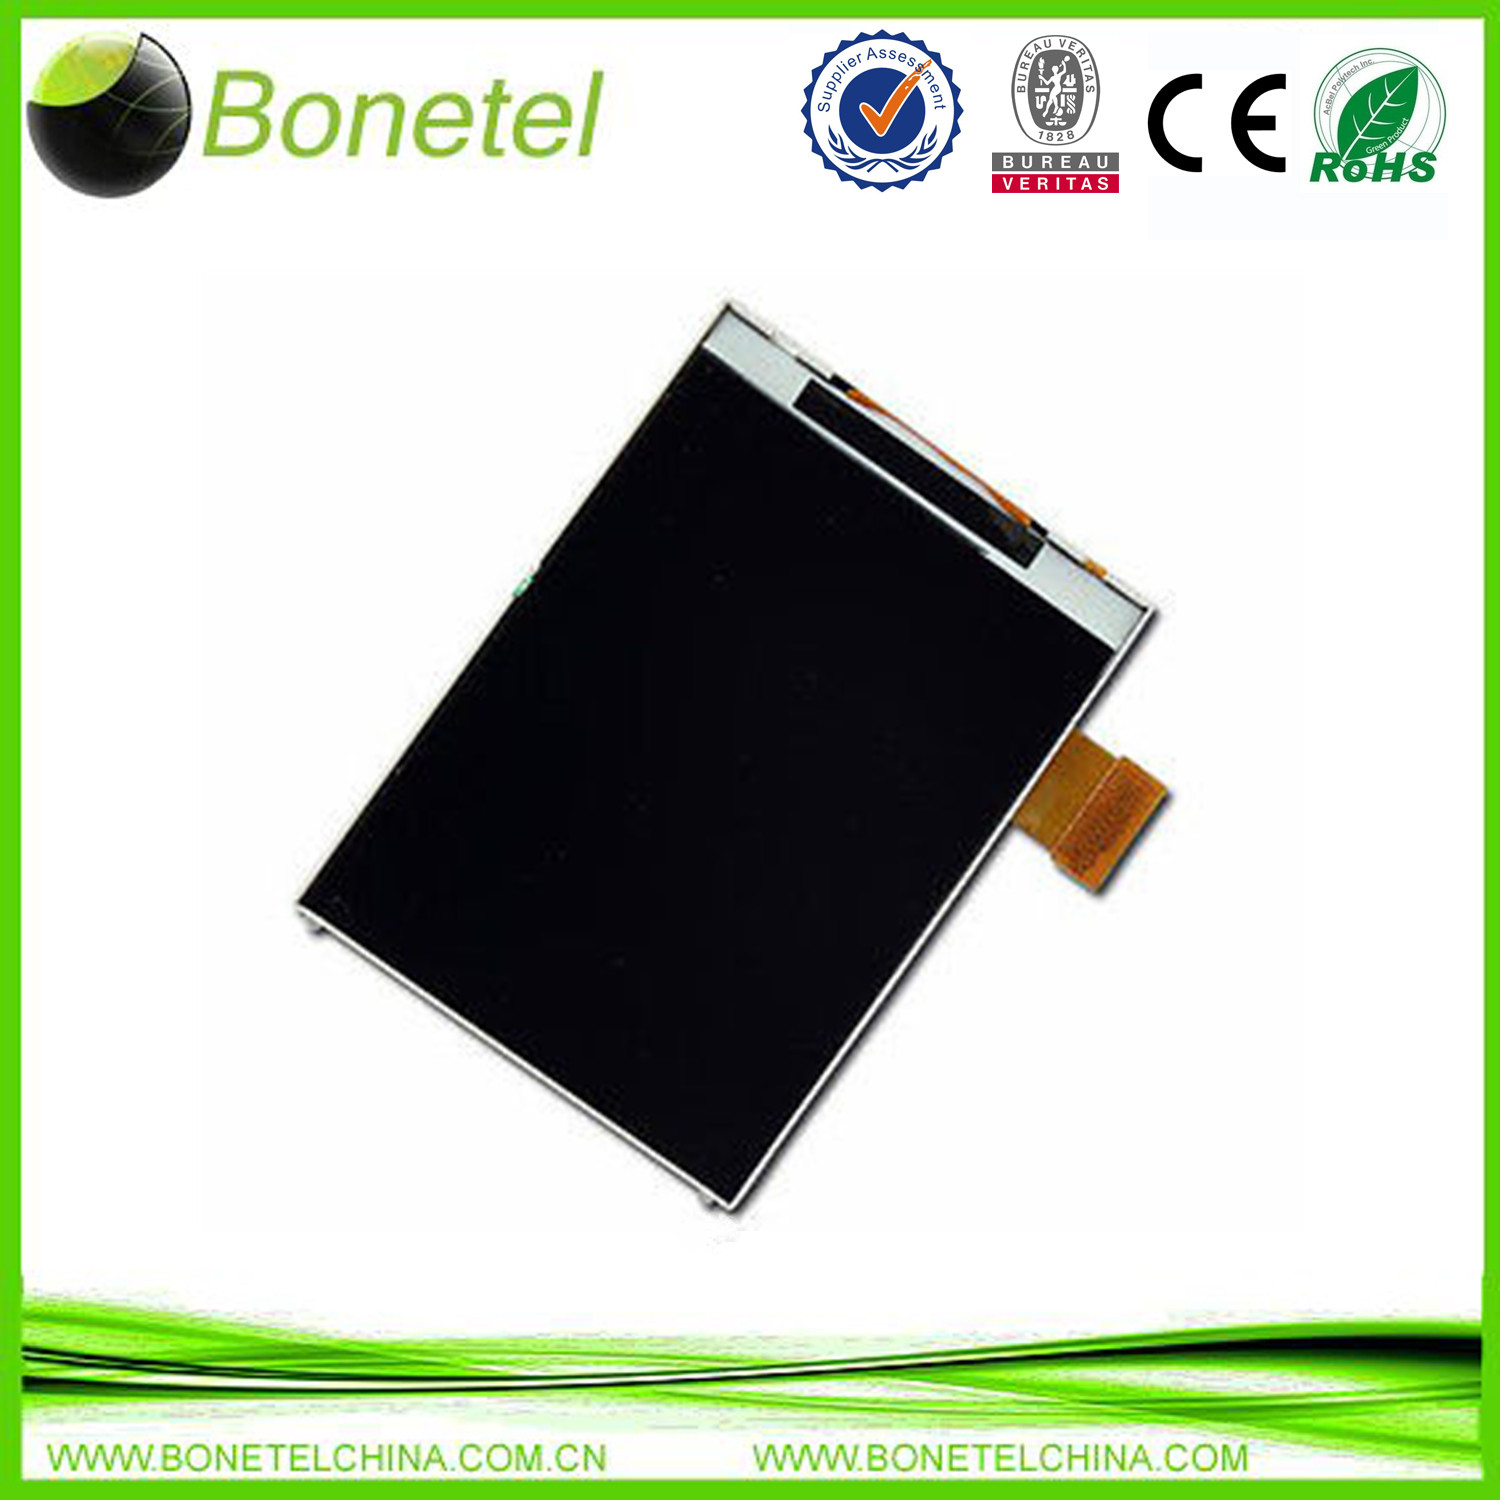 LCD DISPLAY FOR SAMSUNG S5600